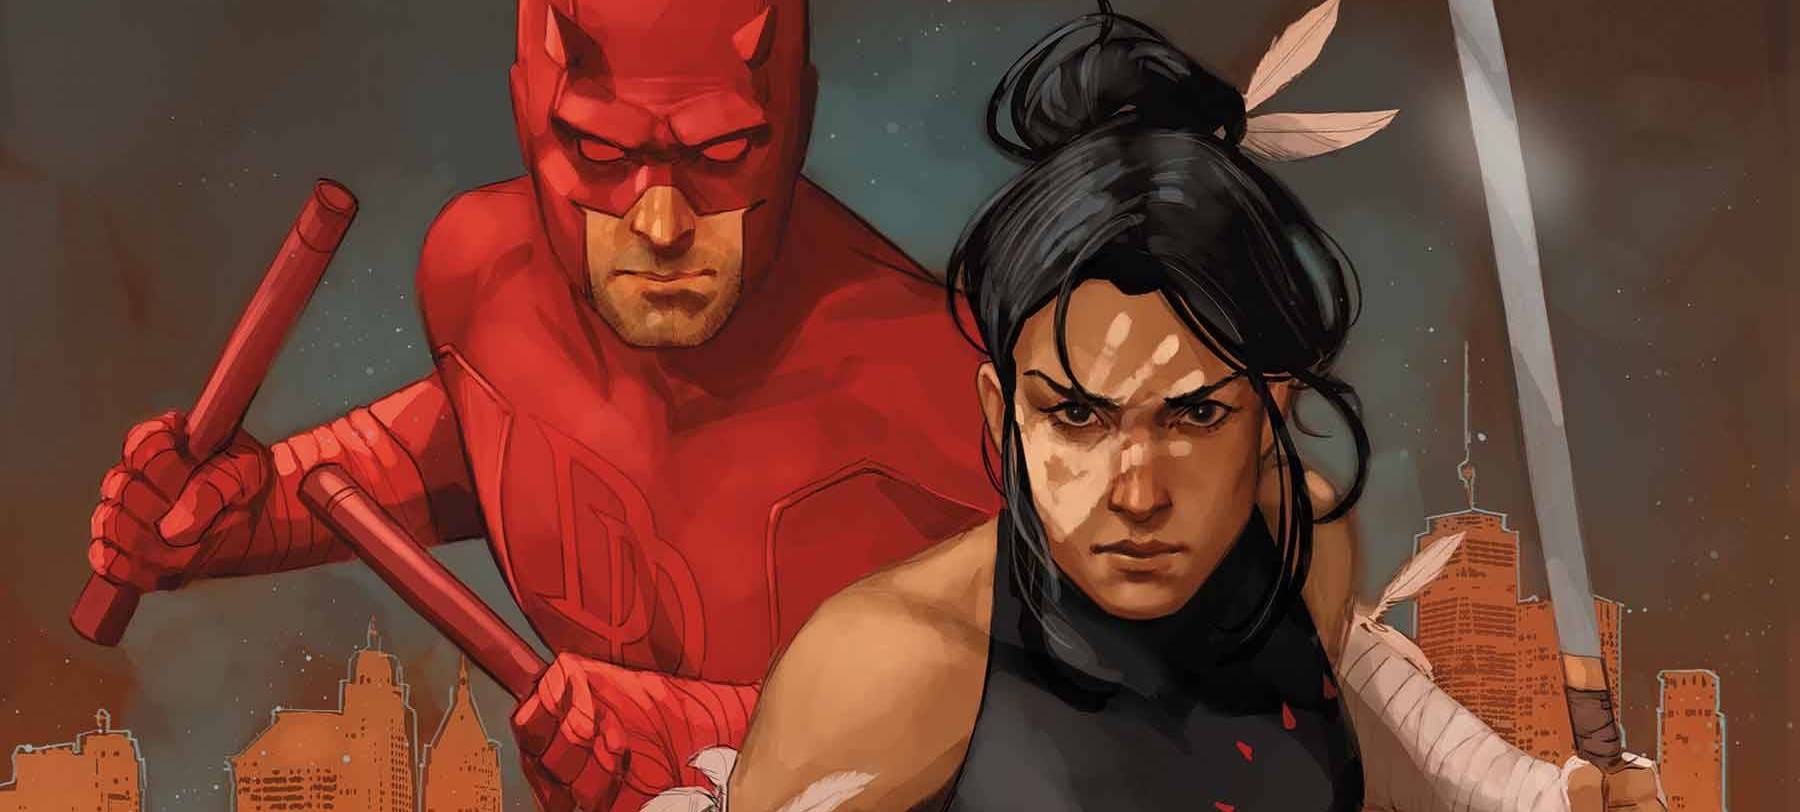 'Daredevil & Echo' TPB blends the past, faith, and paganism in interesting ways